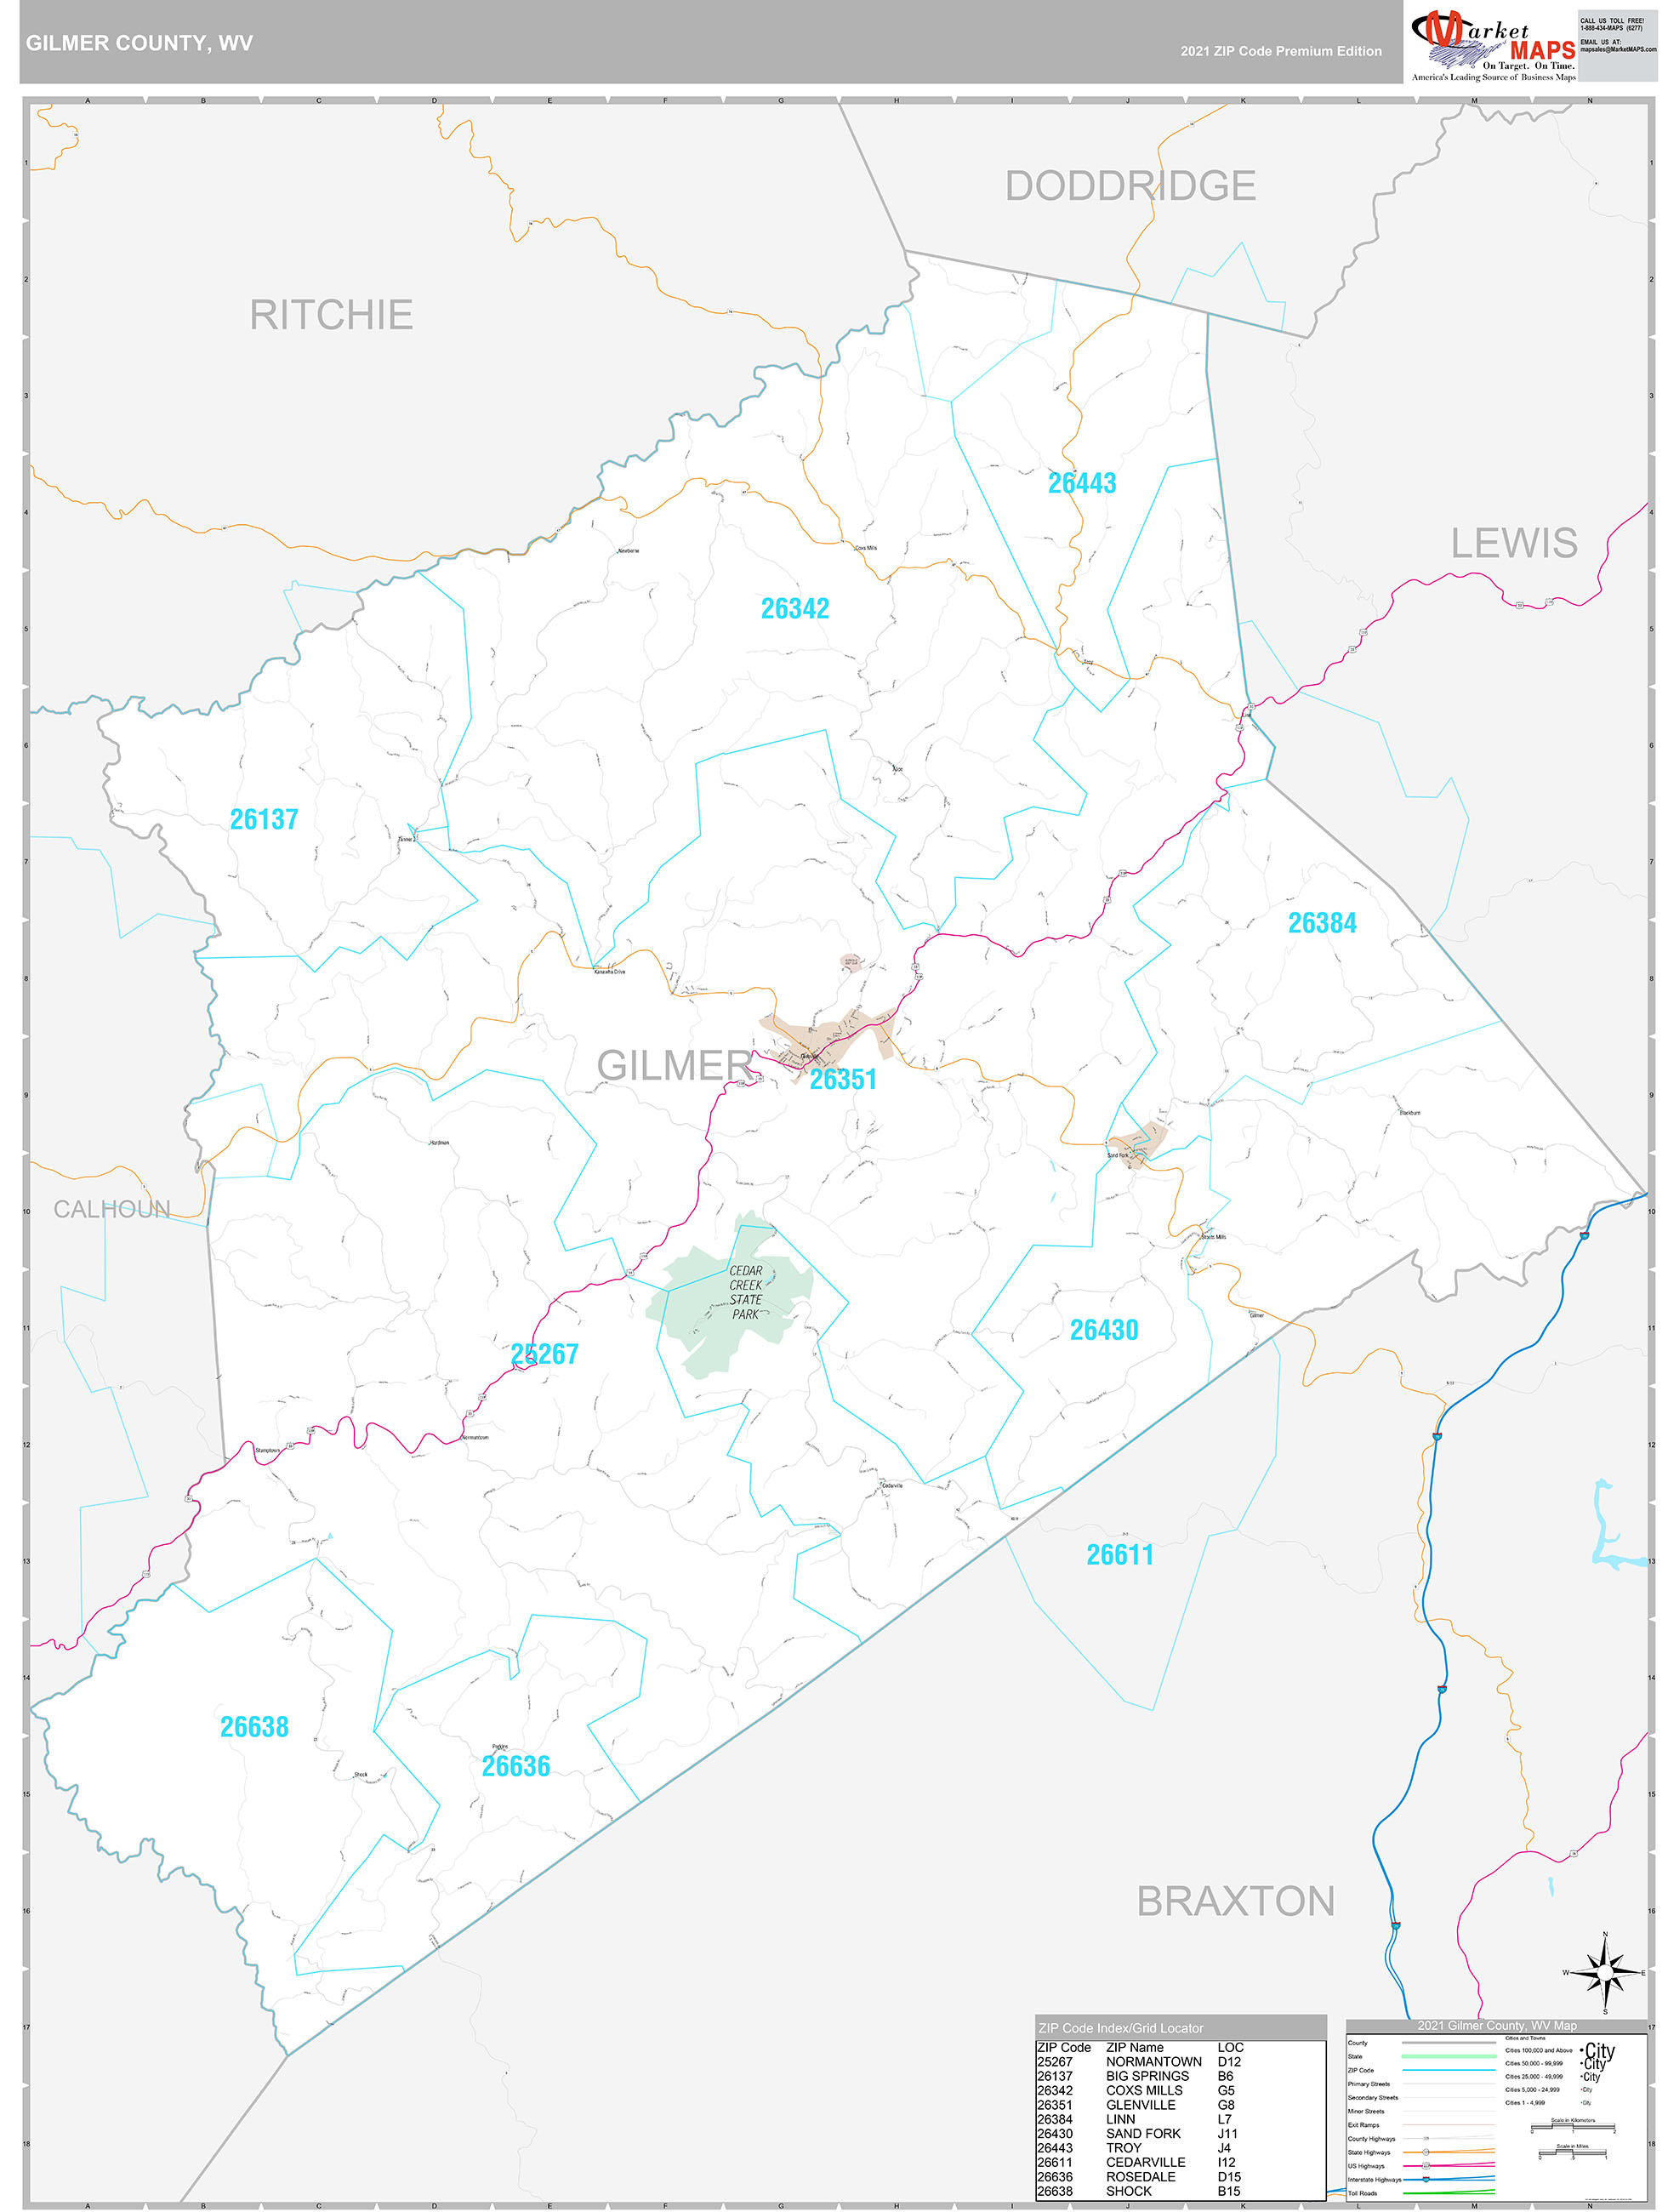 Gilmer County, WV Wall Map Premium Style by MarketMAPS